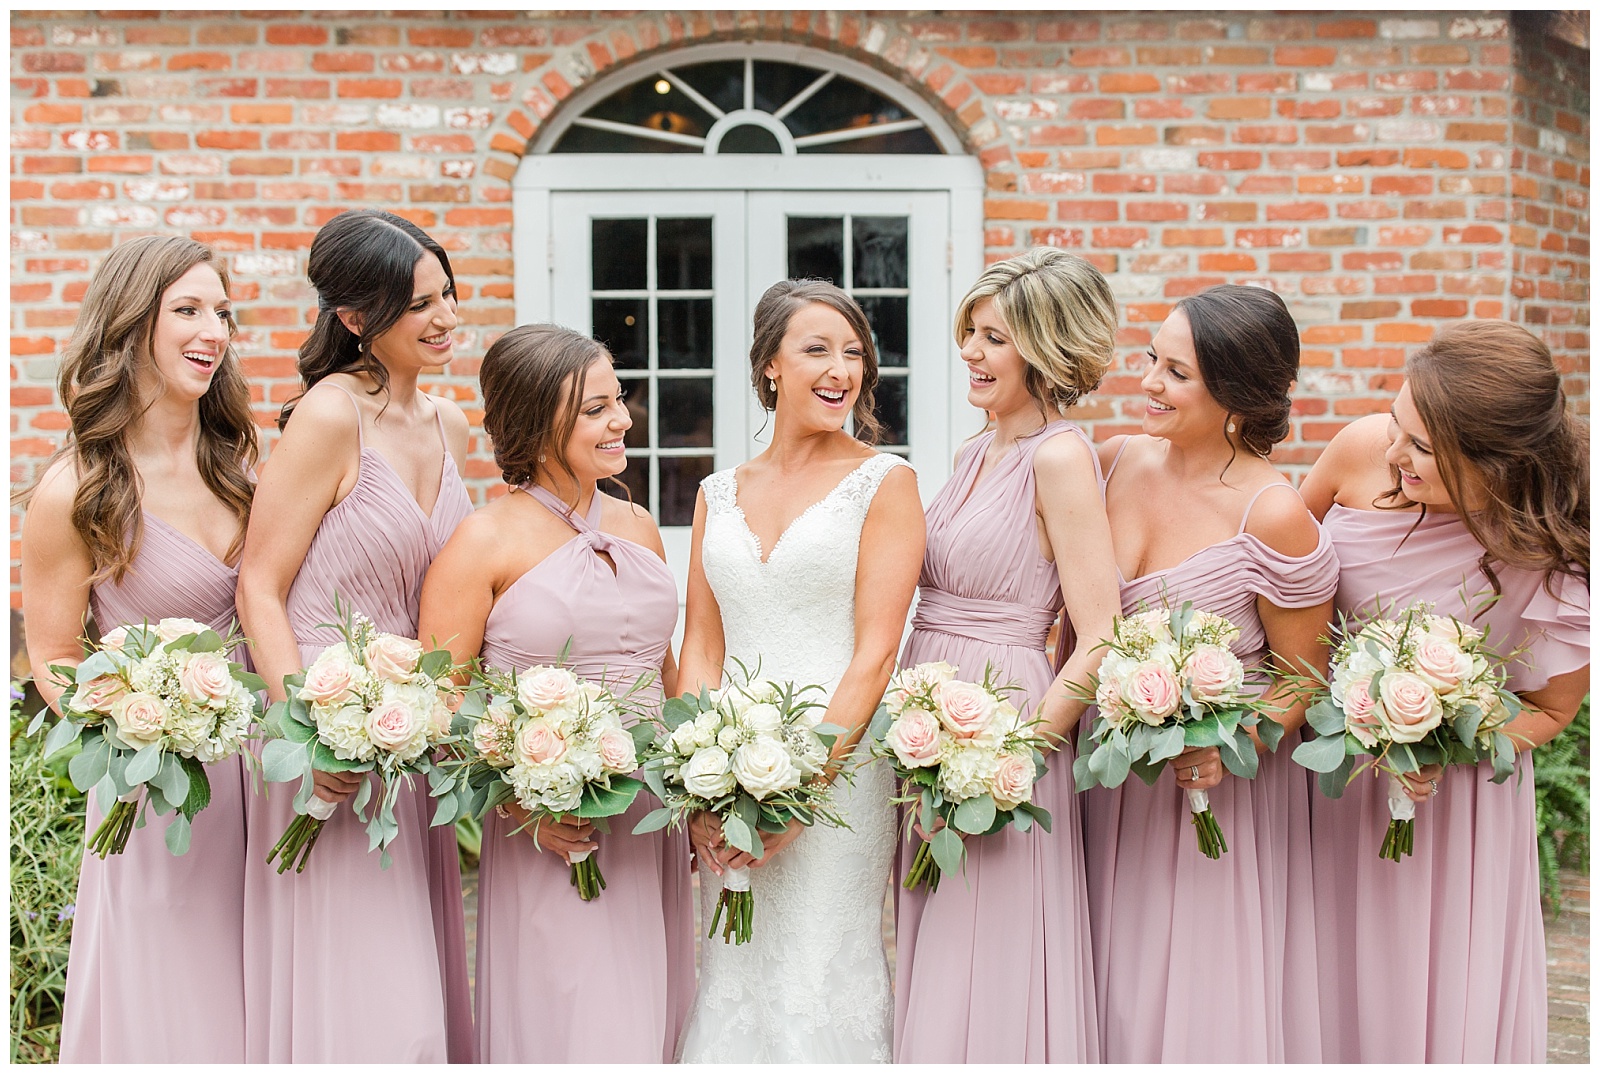 Christie & Holden | A Blush and Navy Wedding at the Cabin in Gonzales ...